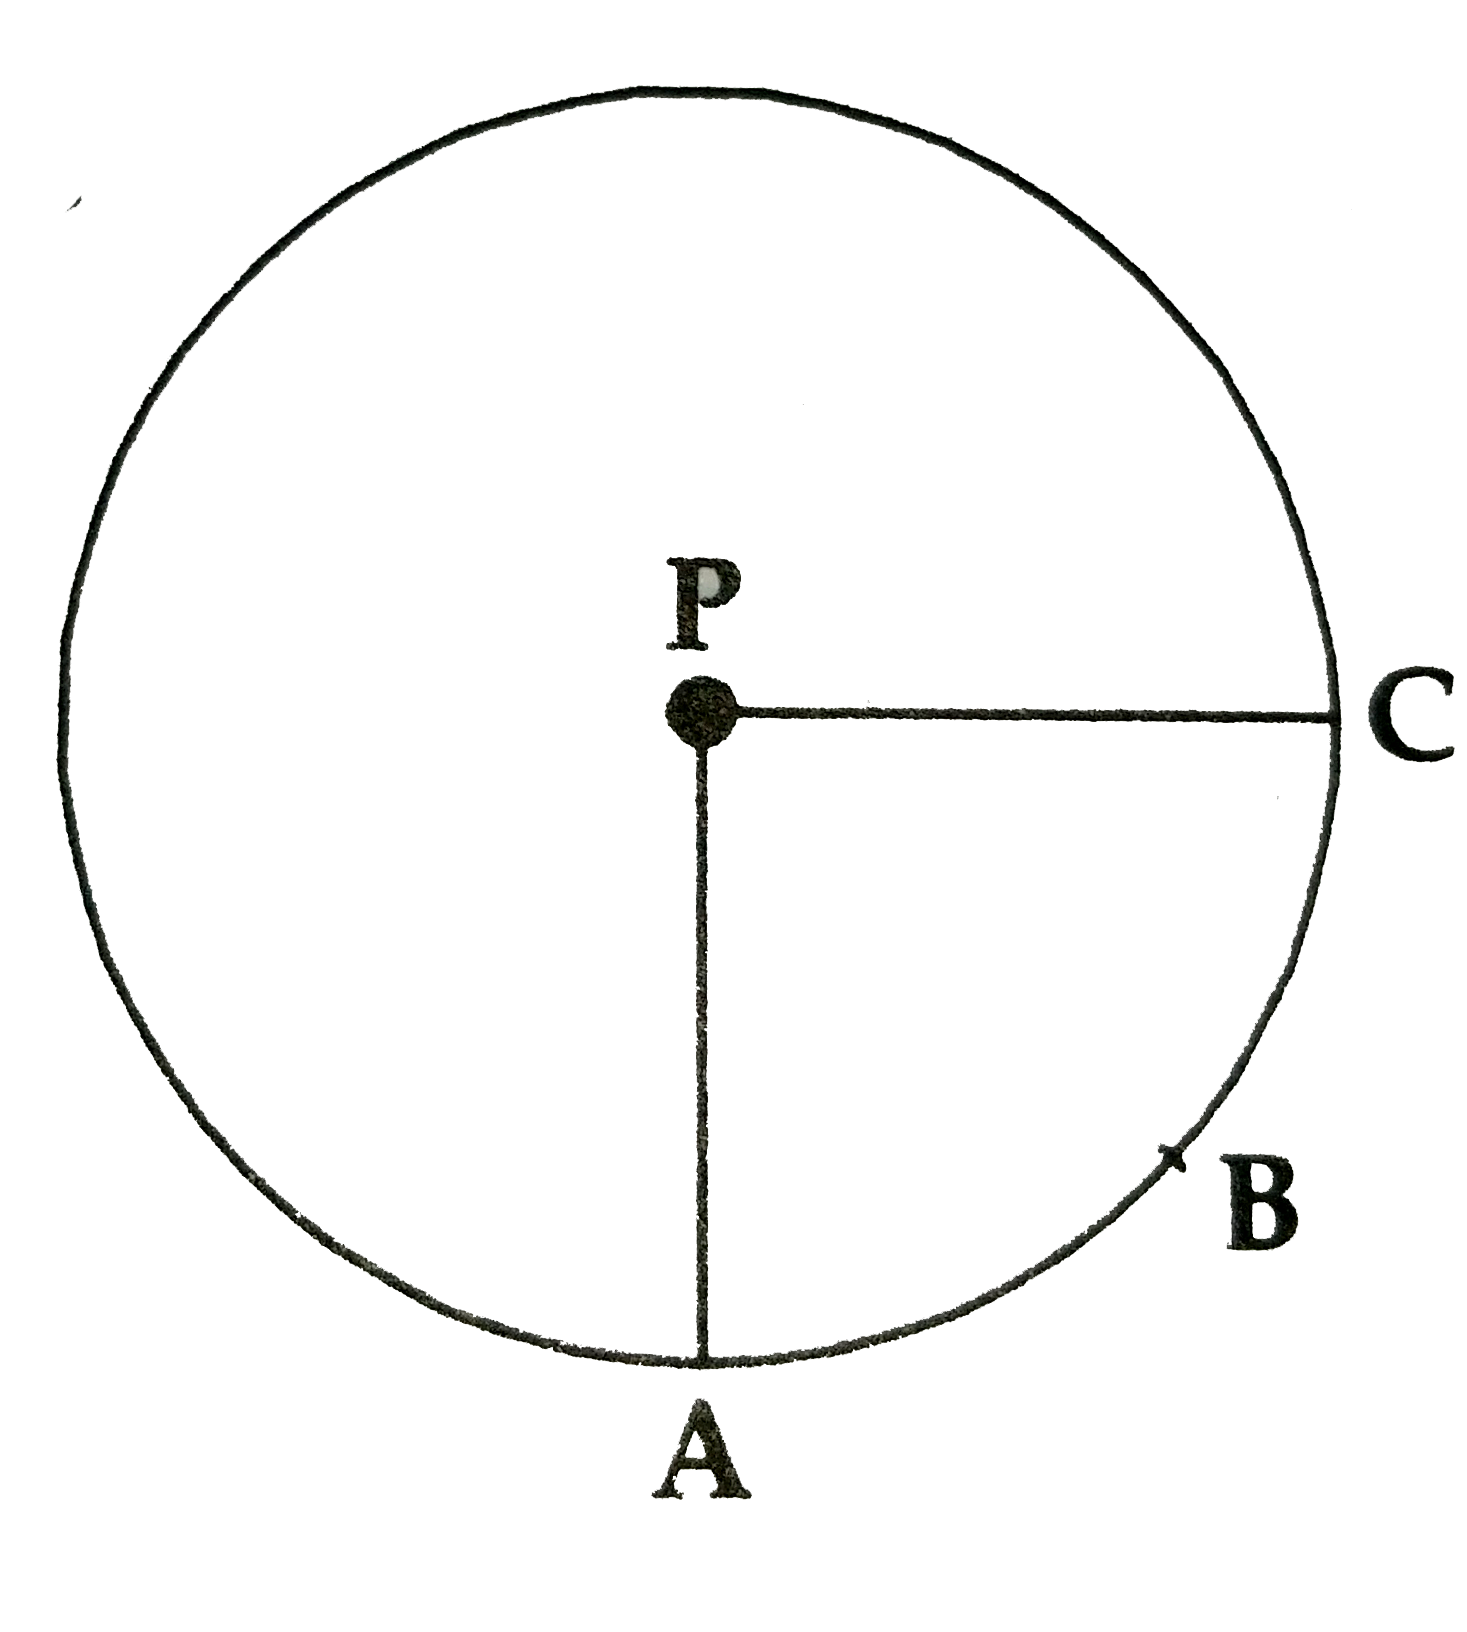 In the given figure,  if A(P-ABC) =154 cm^2, radius of the circle  is 14 cm,   Find   (1) angleAPC   (2) I(arc ABC)      Given A(P-ABC) =154cm^(2)   r=14cm, pi=22/7   To find (i) angleAPC (ii) l(arc ABC)